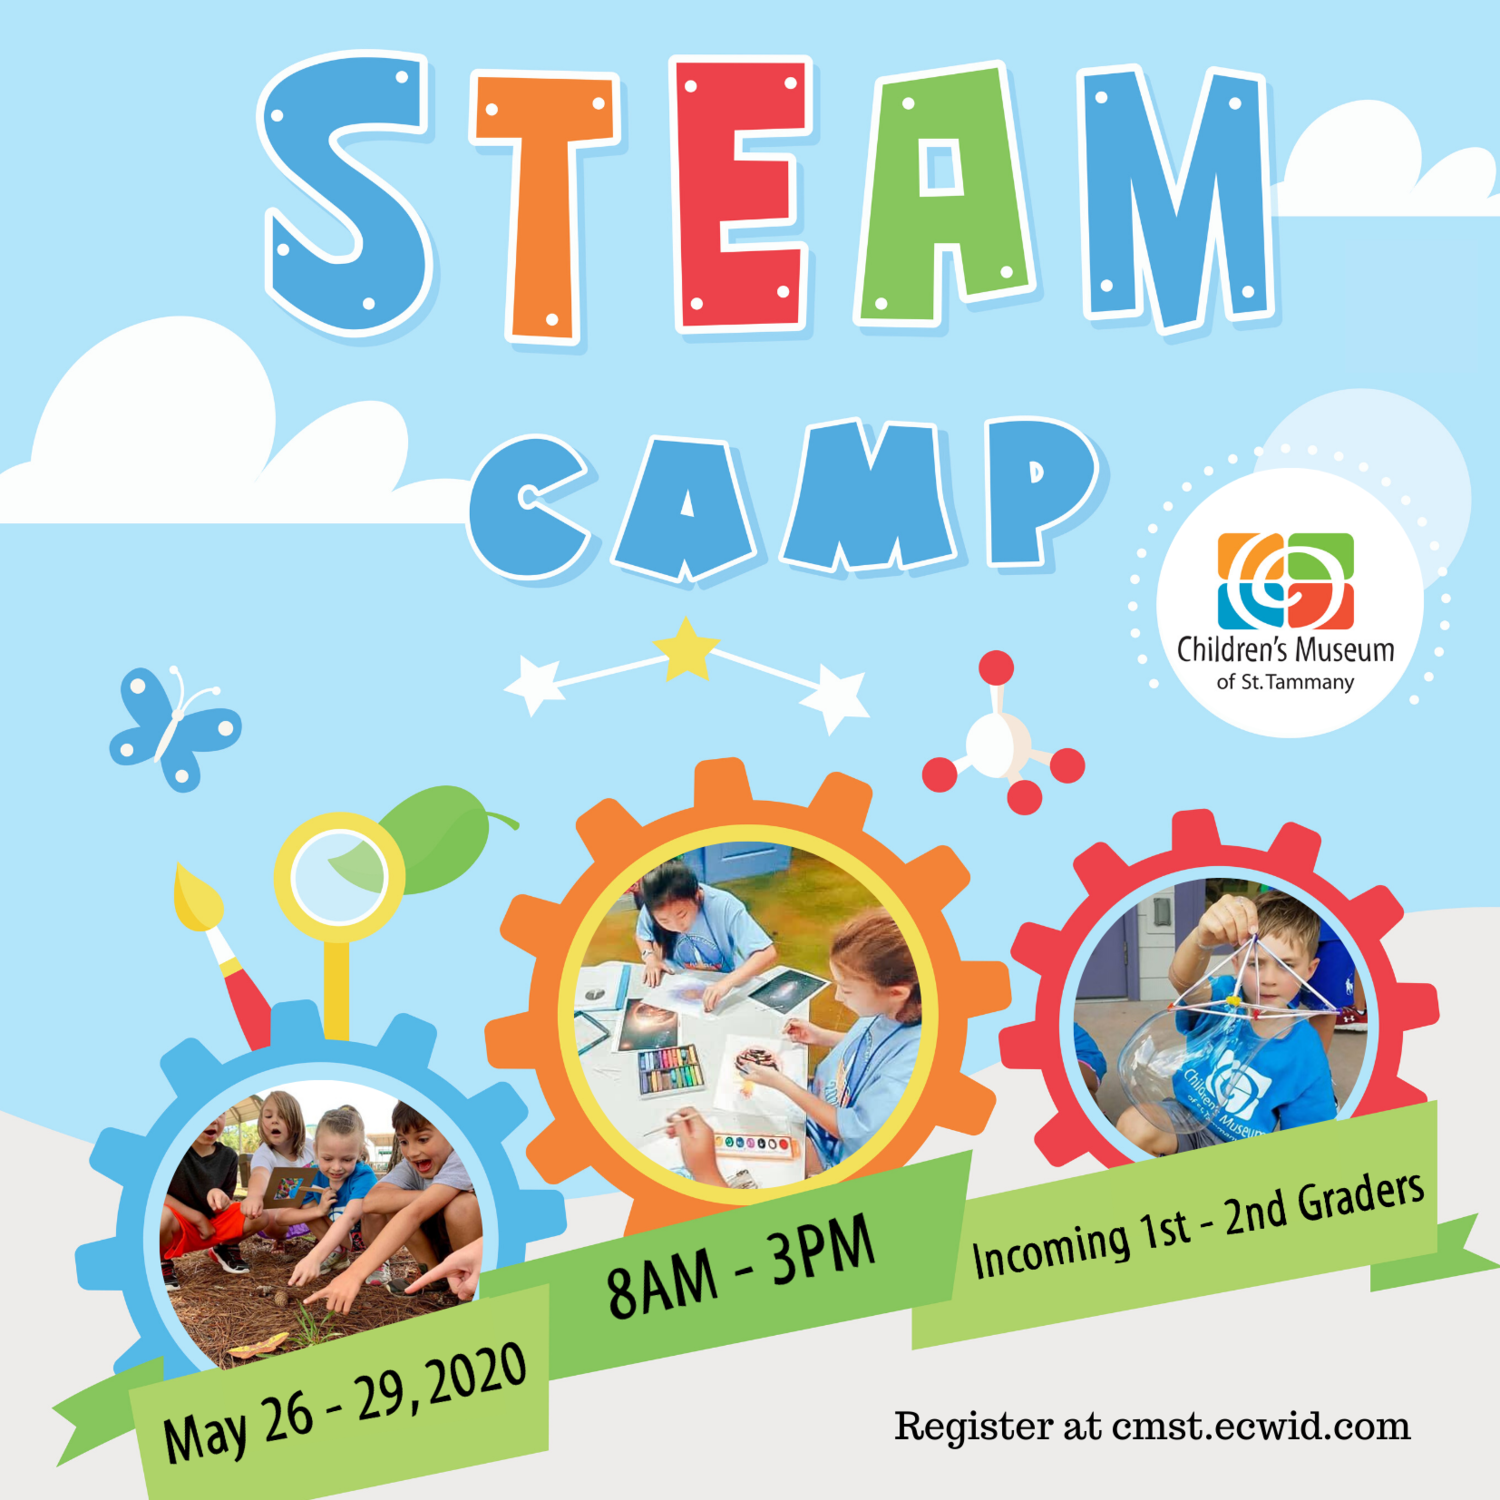 STEAM Camp for Incoming 1st-2nd Graders